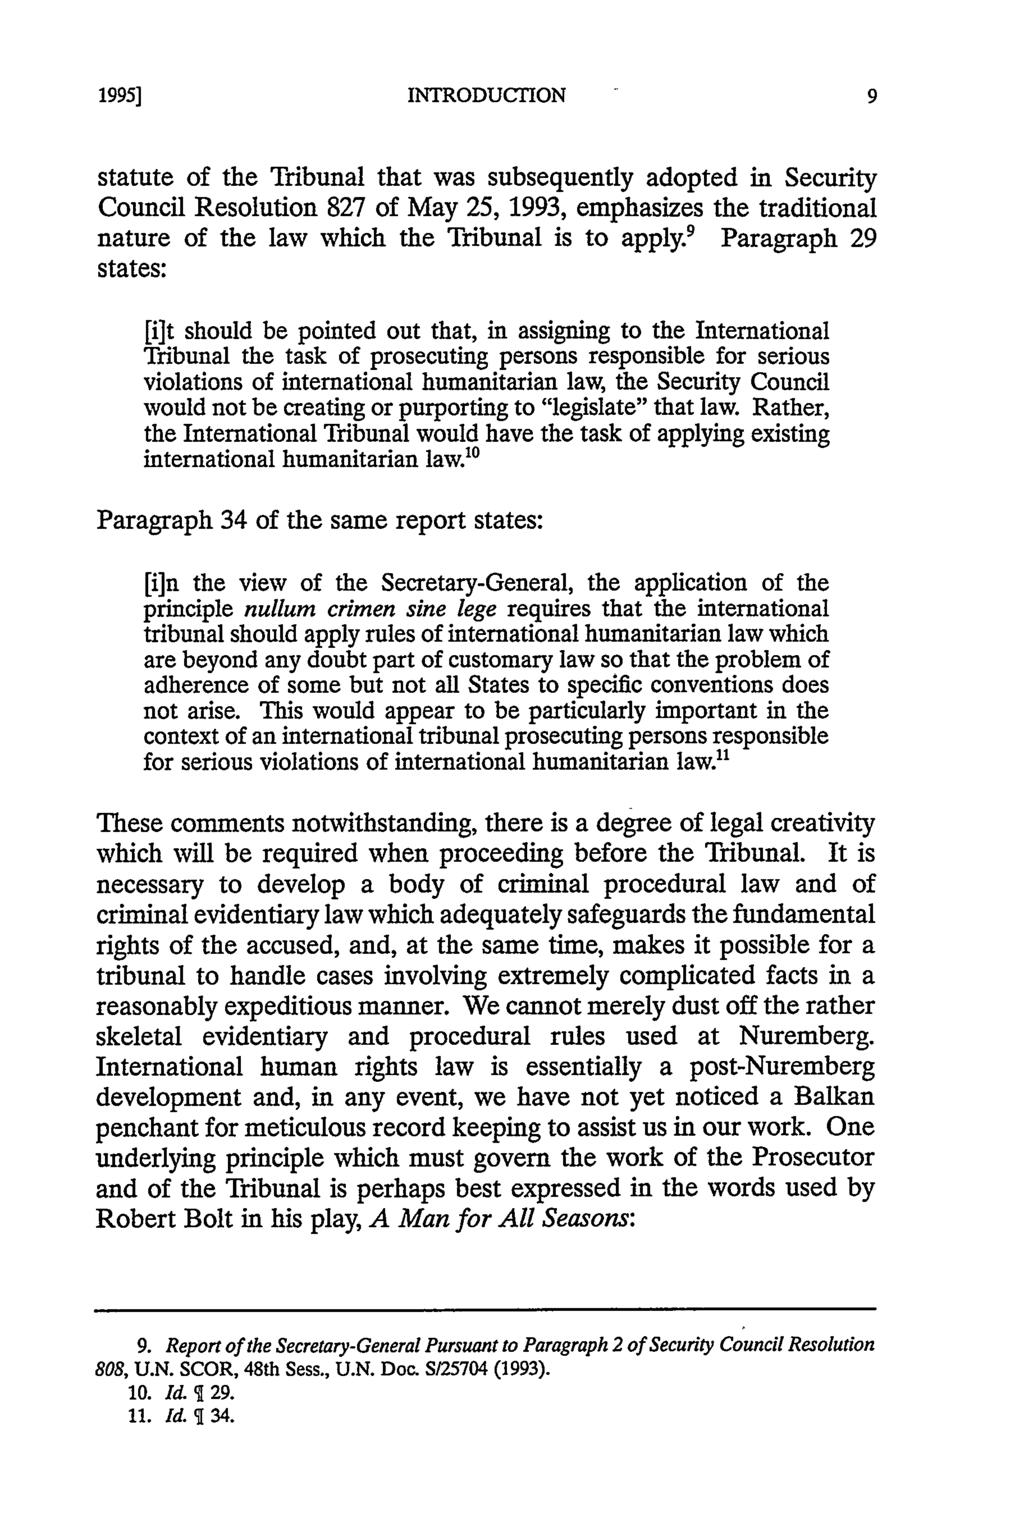 1995] INTRODUCTION statute of the Tribunal that was subsequently adopted in Security Council Resolution 827 of May 25, 1993, emphasizes the traditional nature of the law which the Tribunal is to